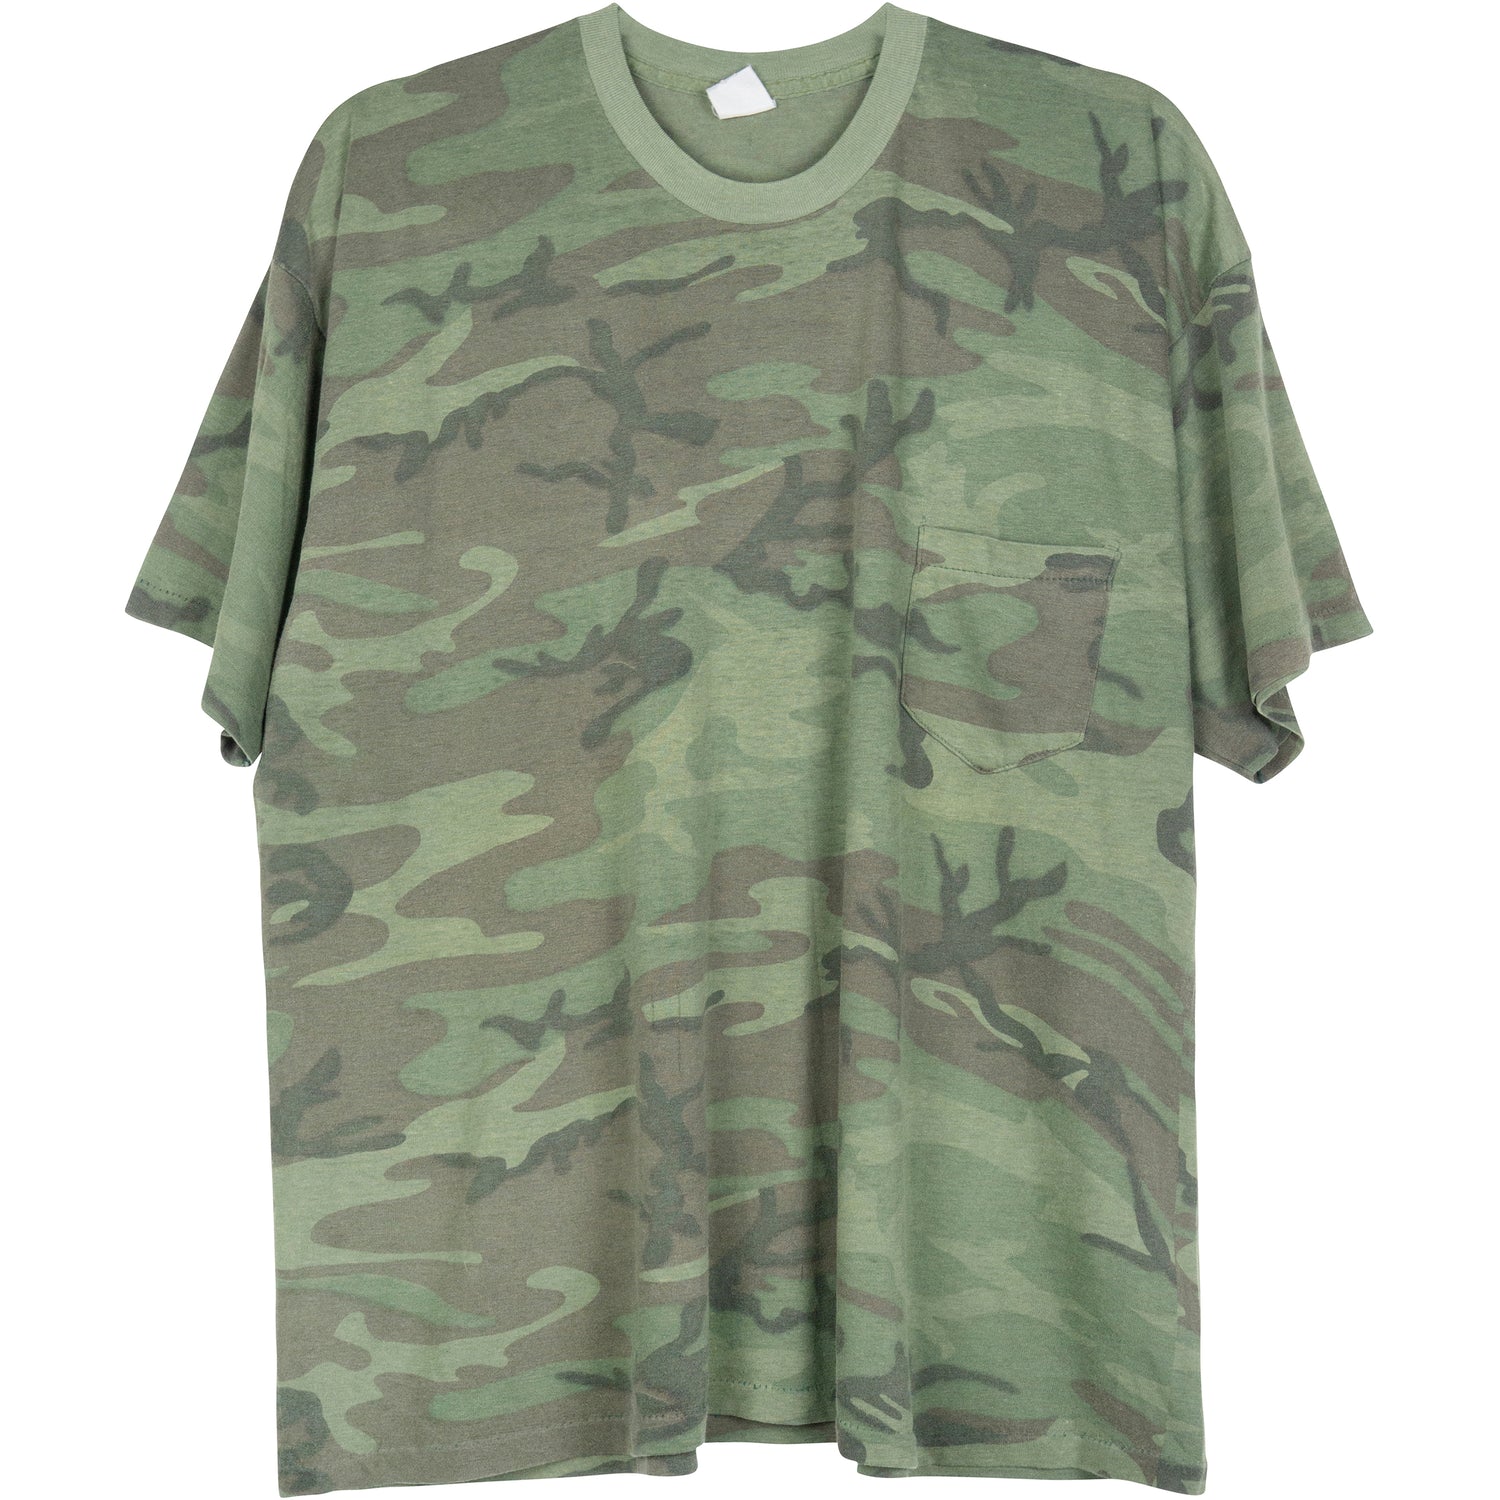 VINTAGE CAMOUFLAGE ARMY T-SHIRT